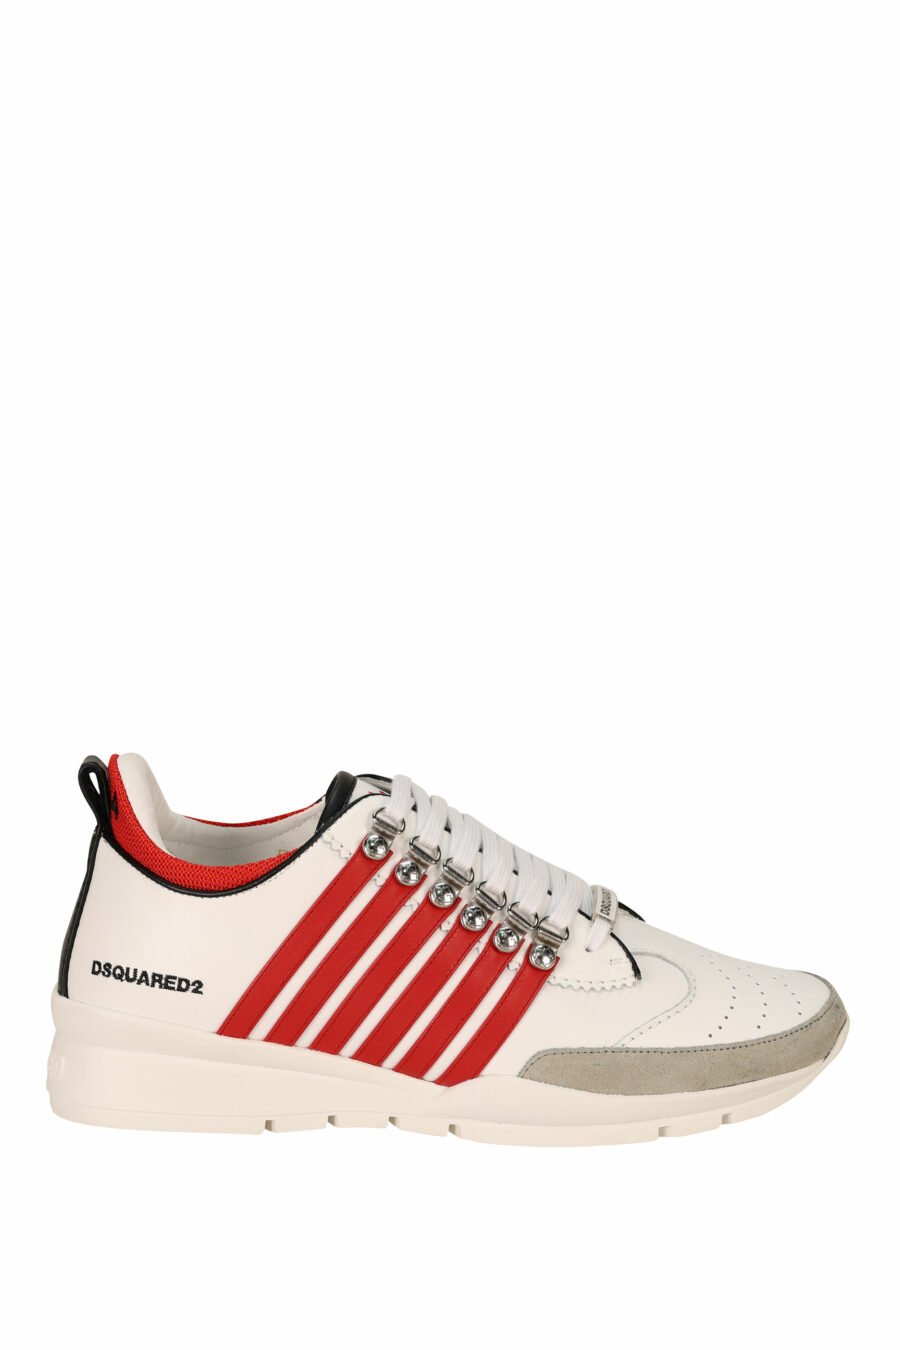 White trainers with red lines and white sole - 8055777300985